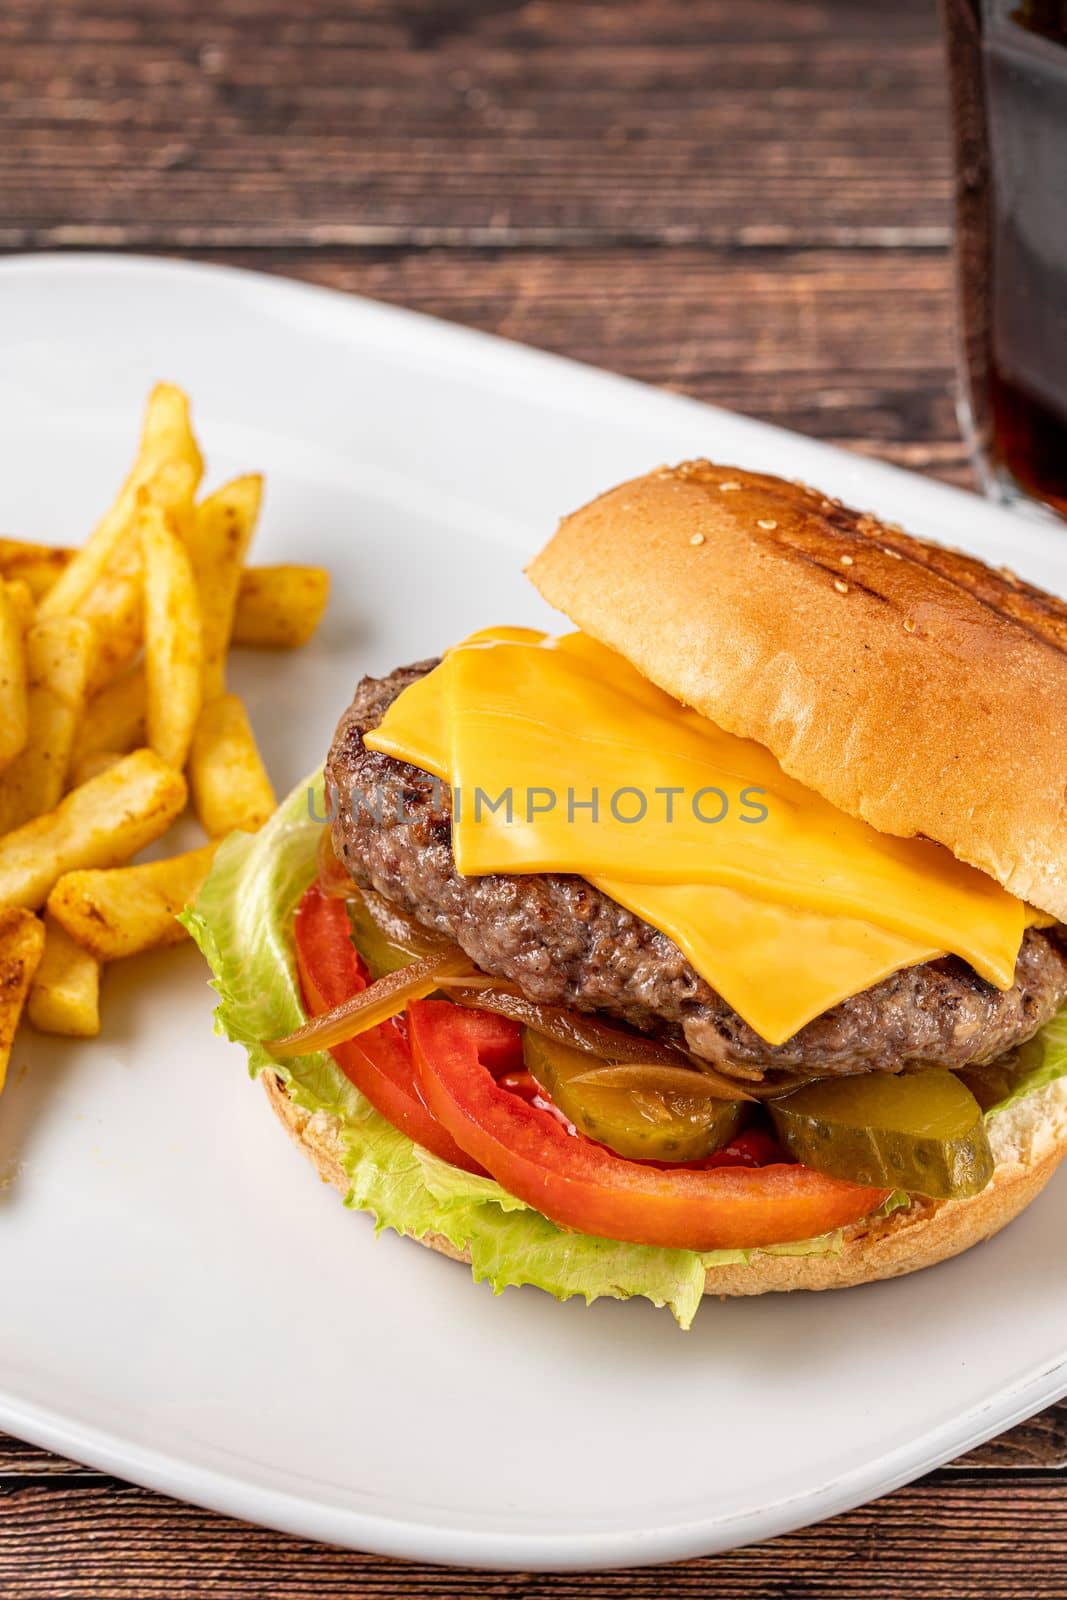 Cheeseburger with Tomatoes and Pickles with French Fries and Ketchup by Sonat